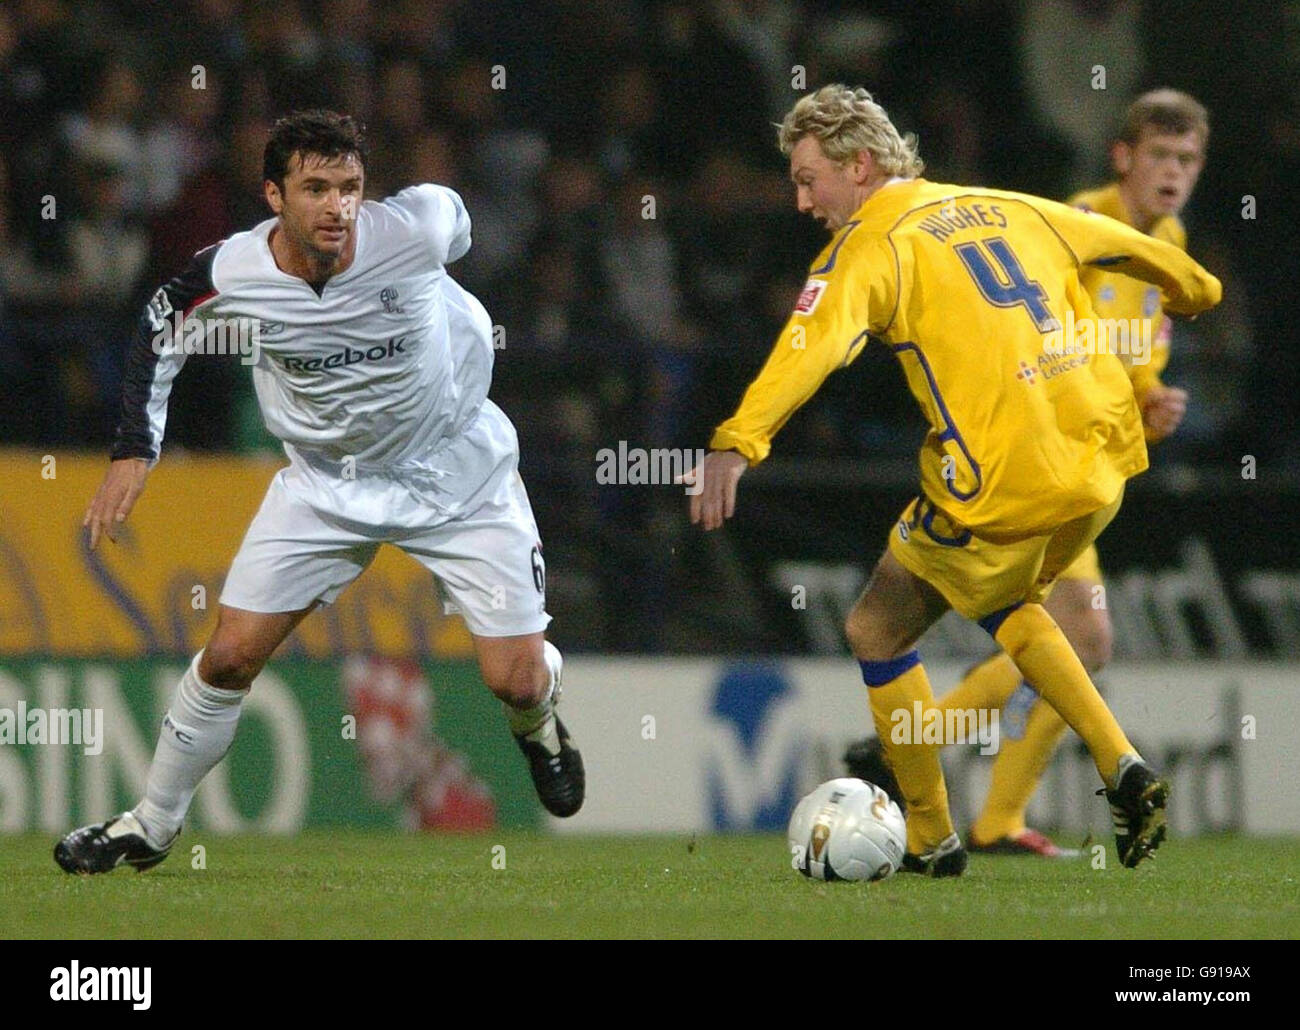 Leicester City's Stephen Hughes in action against Bolton Wanderers' Gary Speed (L) during the Carling Cup fourth round match at Reebok Stadium, Bolton, Wednesday November 30, 2005. PRESS ASSOCIATION Photo. Photo credit should read: PA. Stock Photo